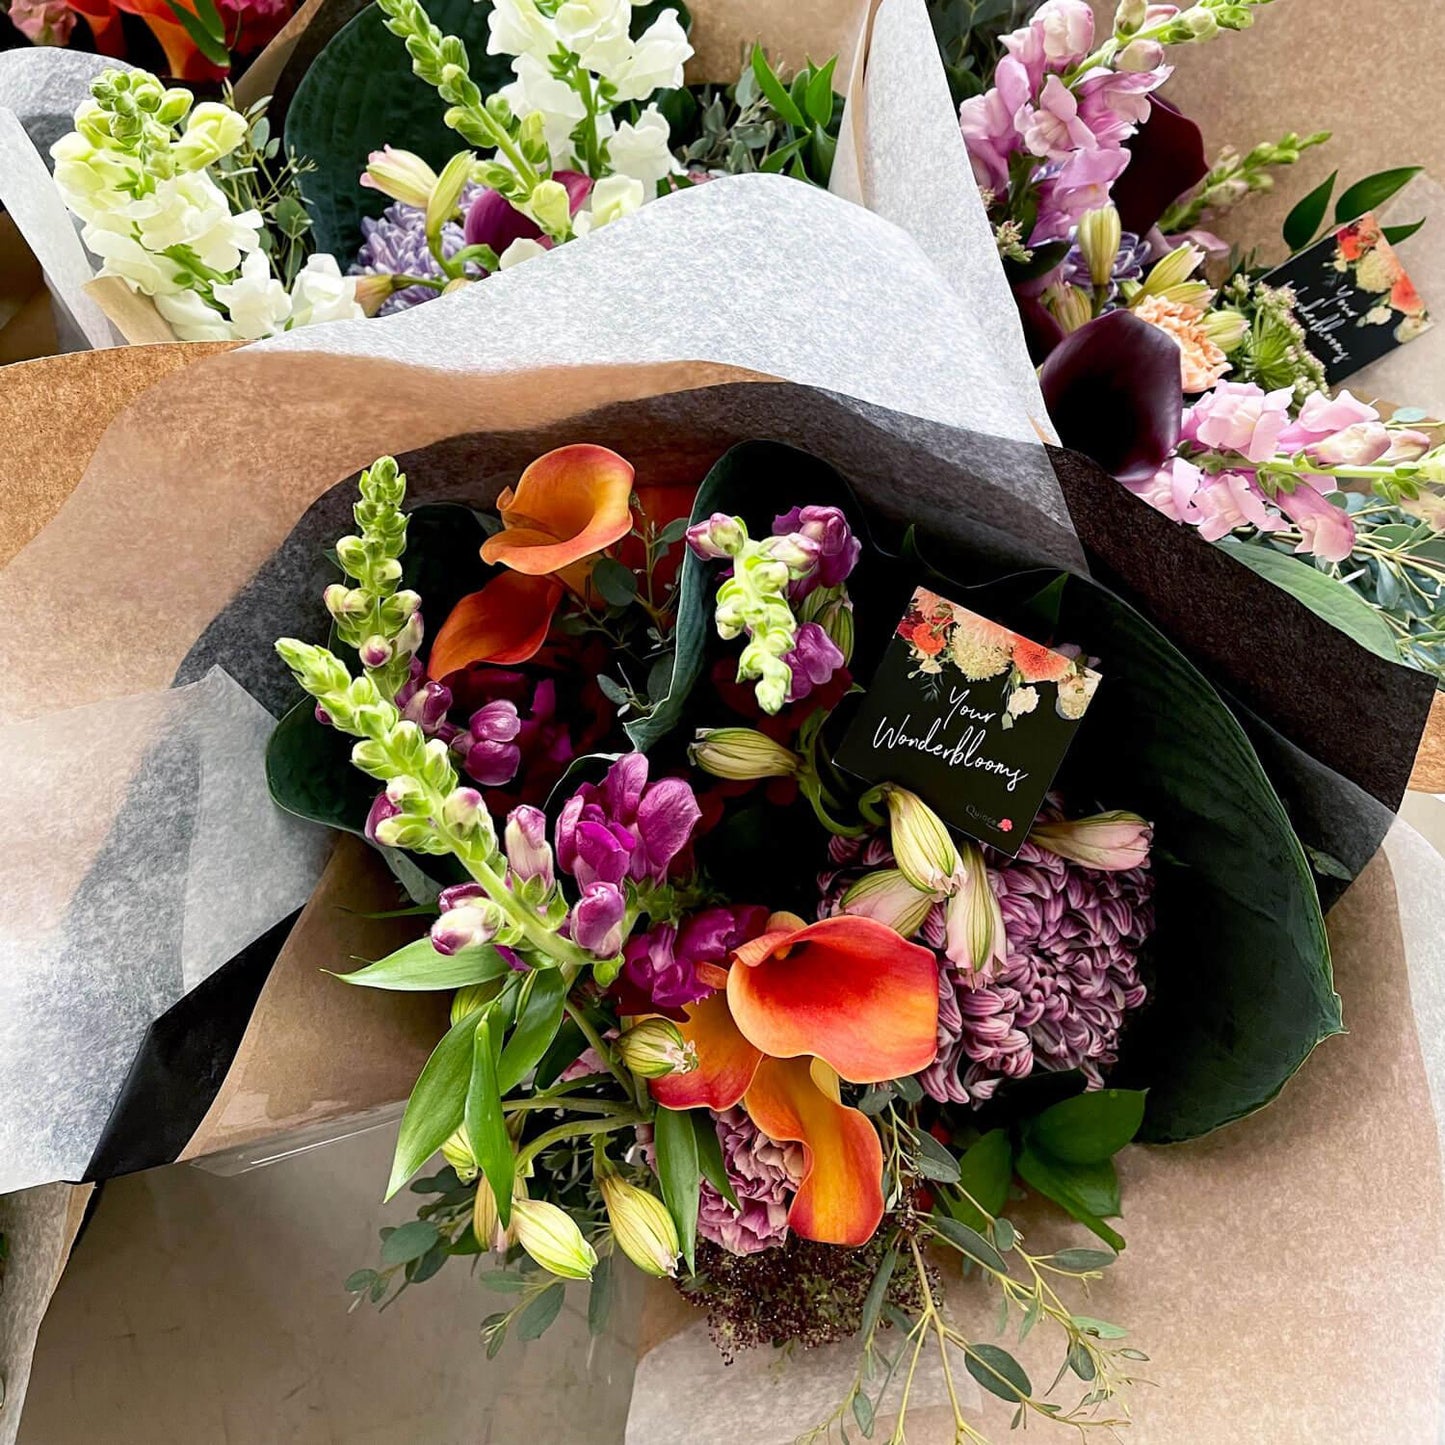 Wonderblooms monthly flower subscription from Quince Flowers, Toronto Florist and flower delivery - bouquet of flowers with calla lilies, colour flower bouquet. Order online for flower & plant subscriptions from the best florist in Toronto near you.